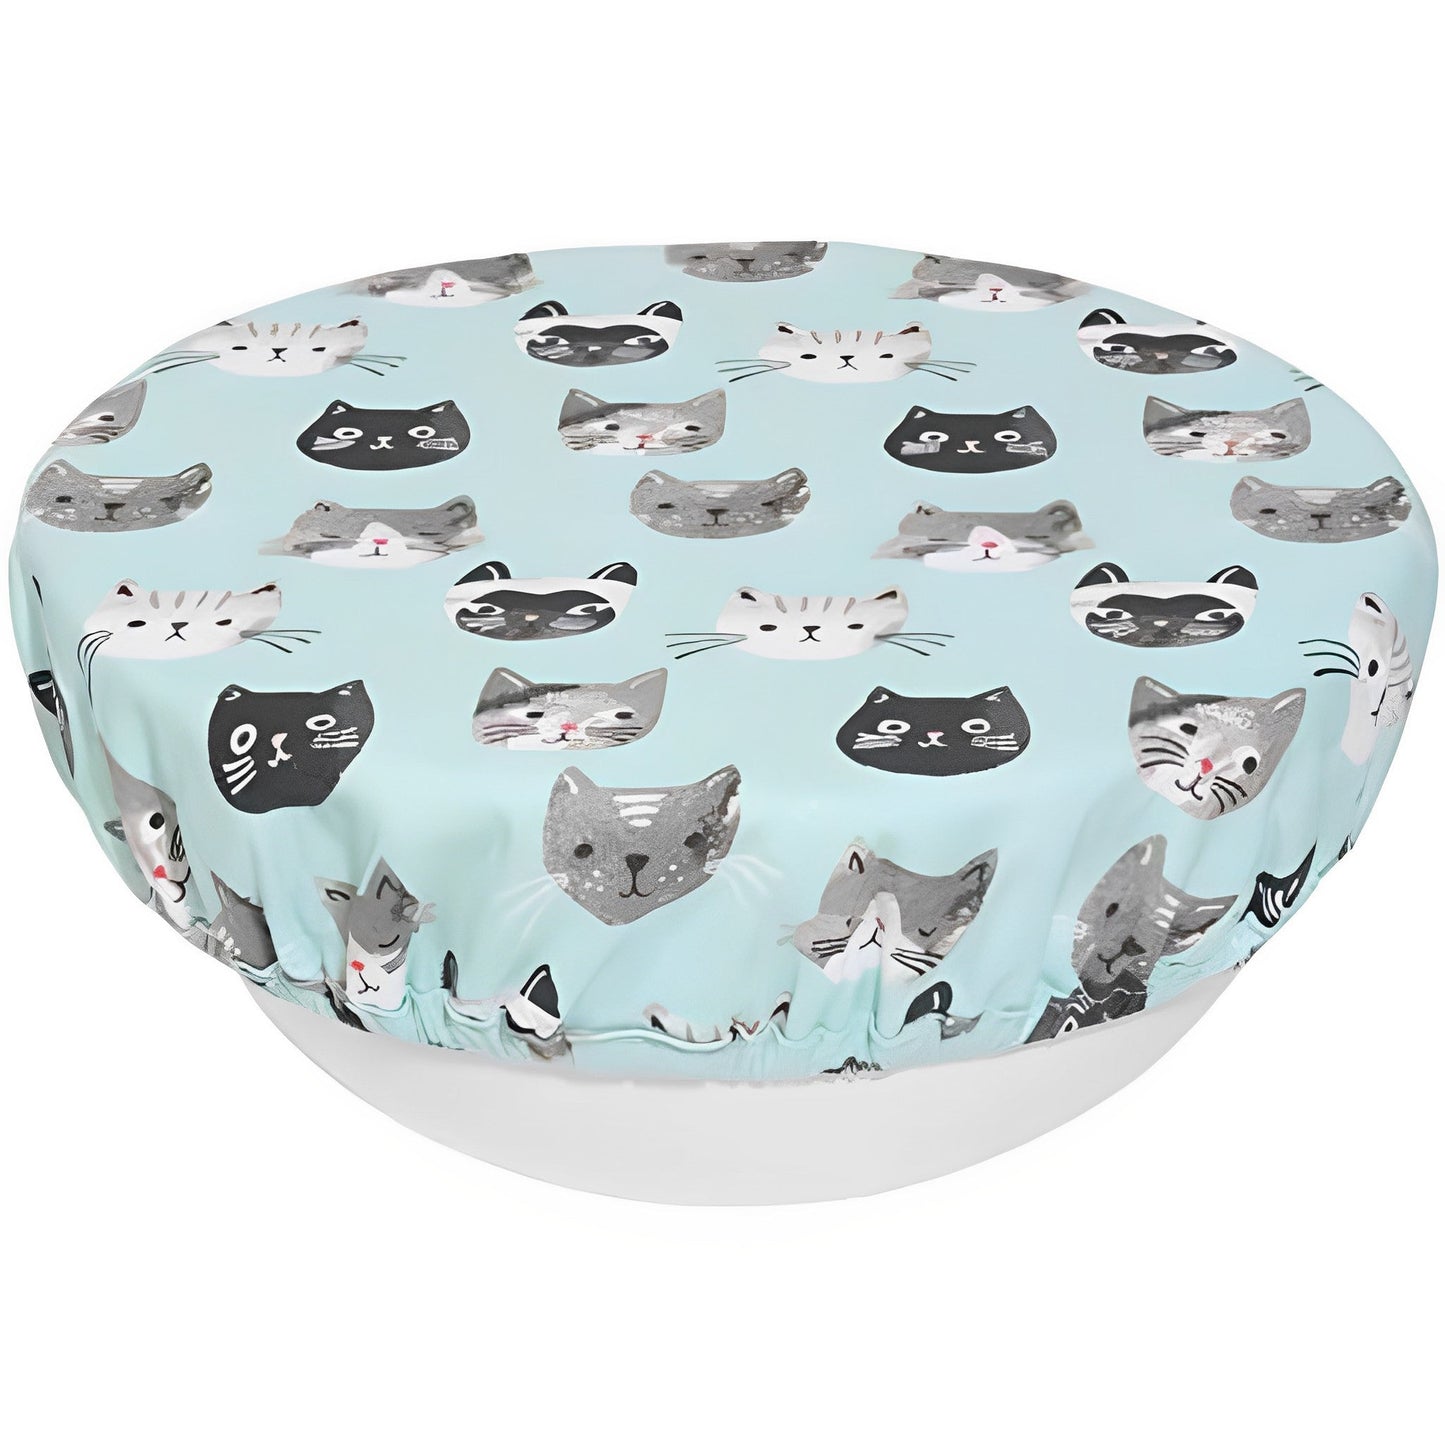 "The Cats Meow": Bowl Covers (Set of 2) - Tiny Tiger Gift Shop